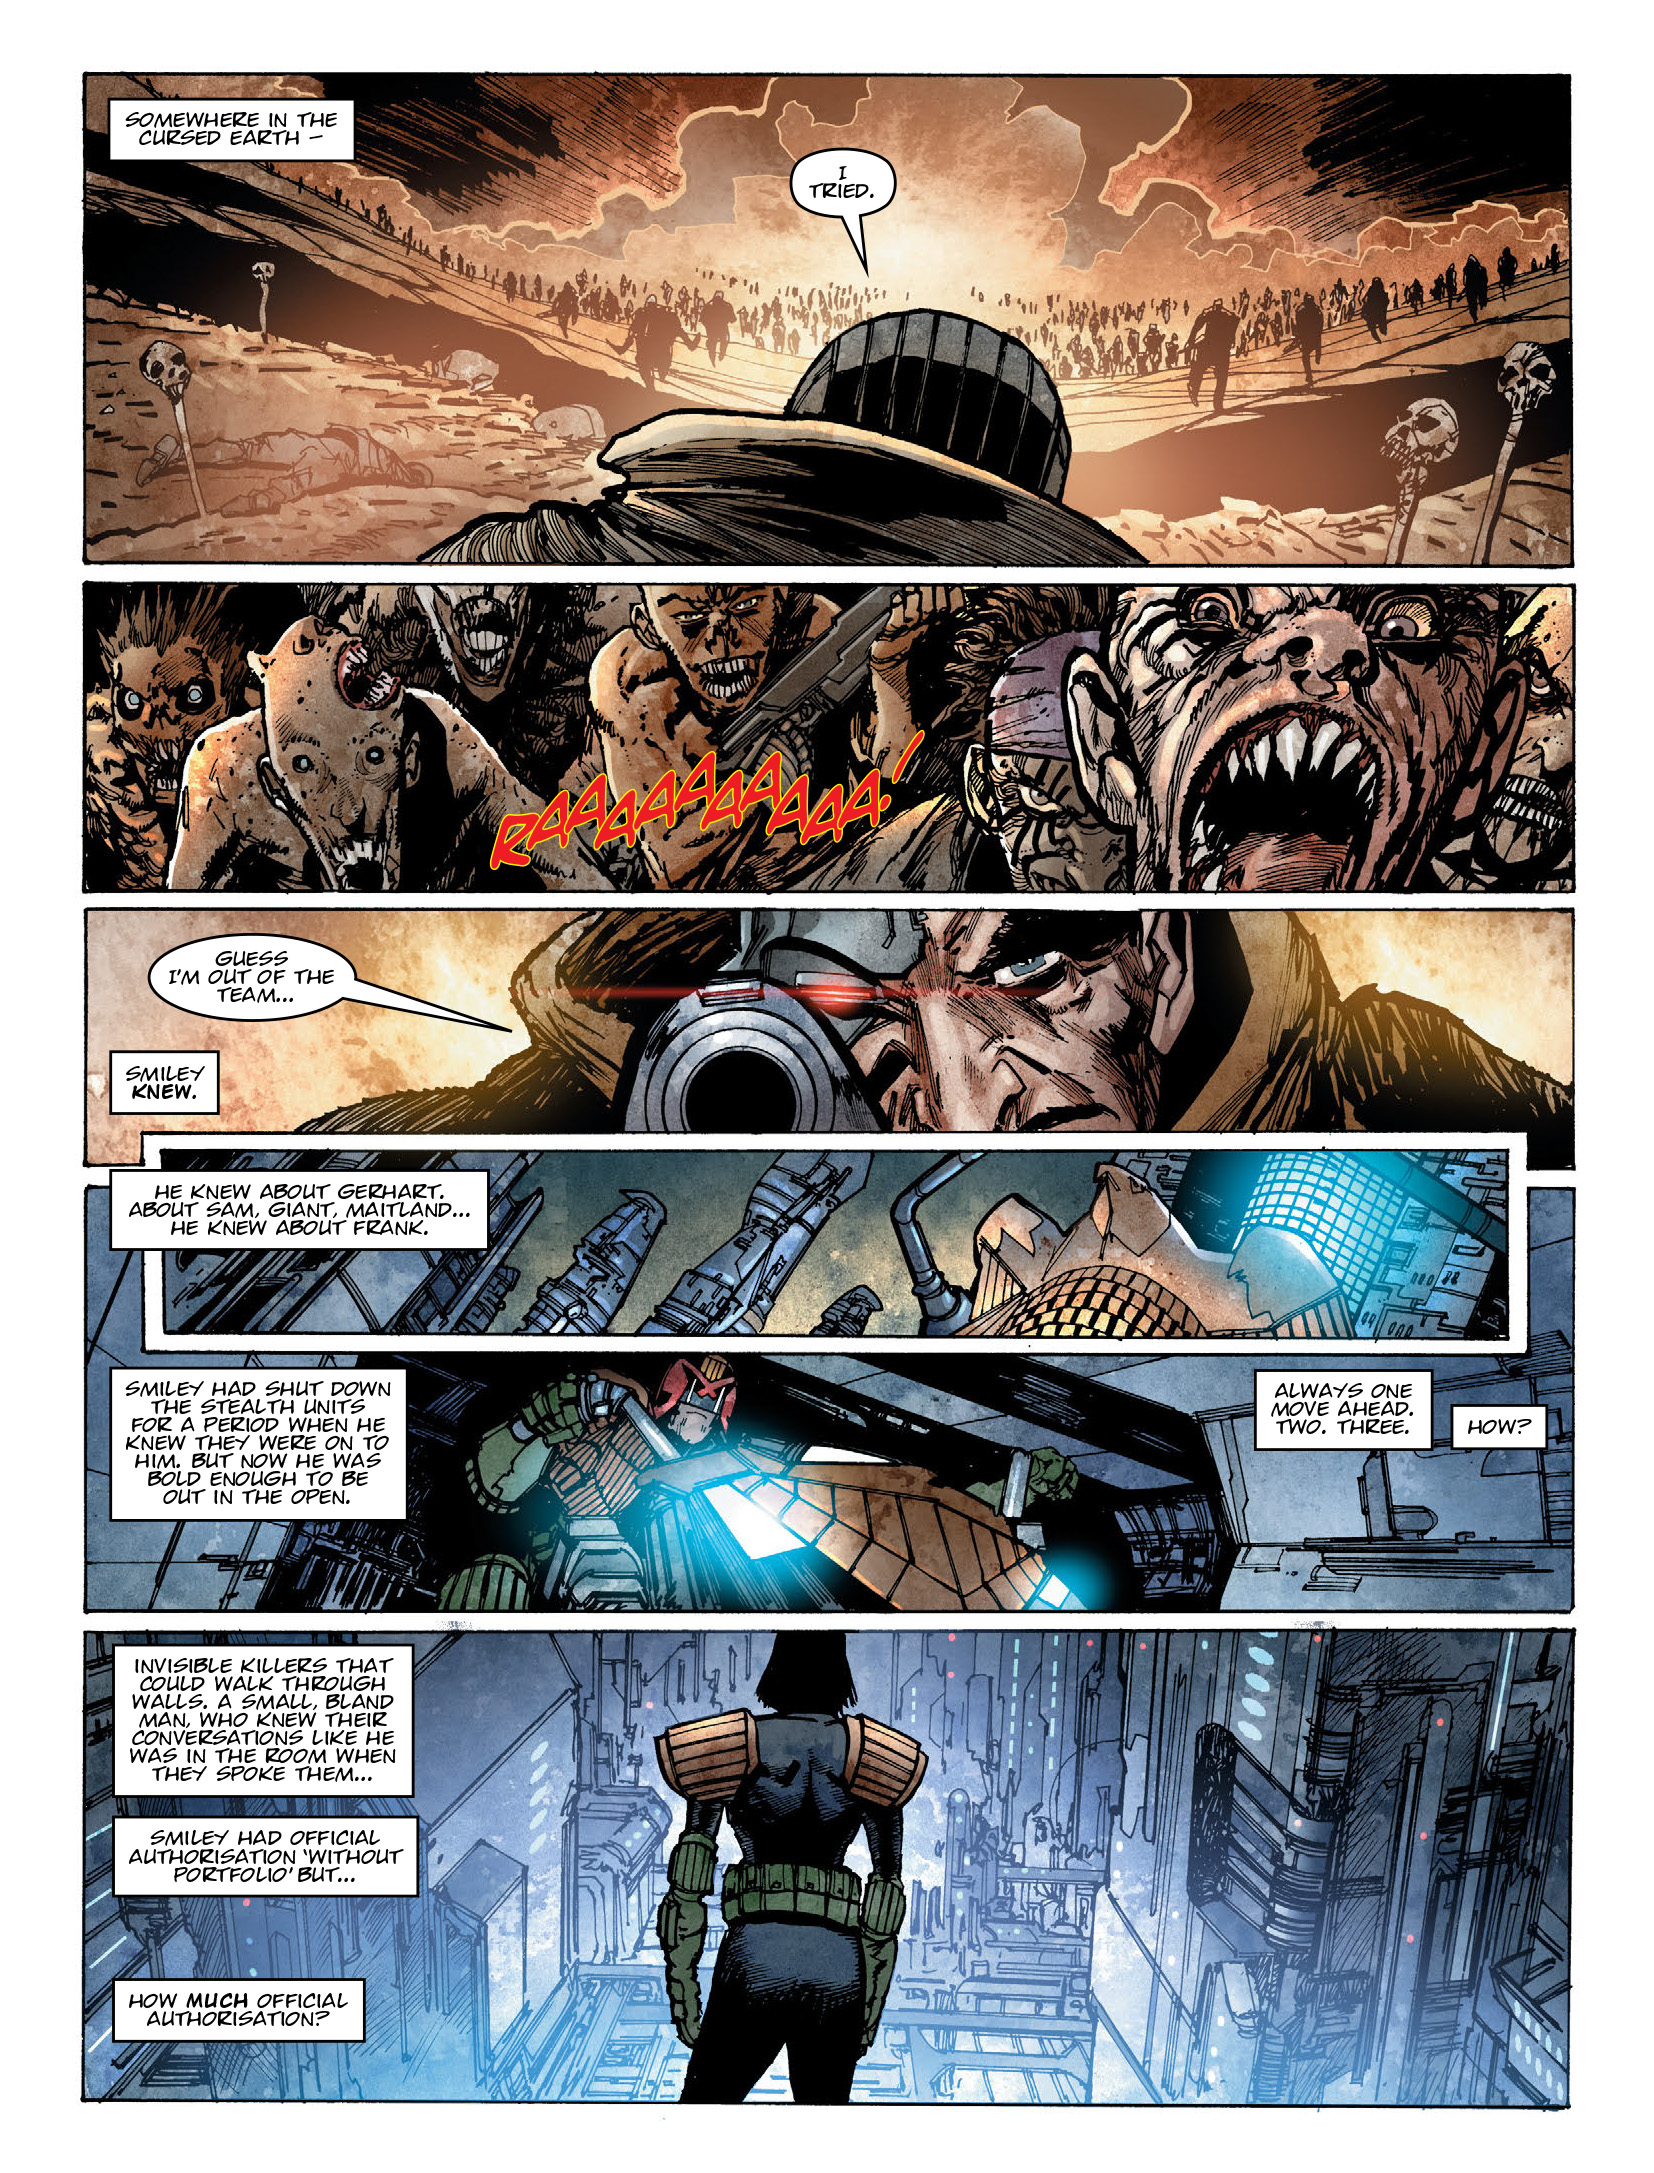 2000 AD: Chapter 2102 - Page 4